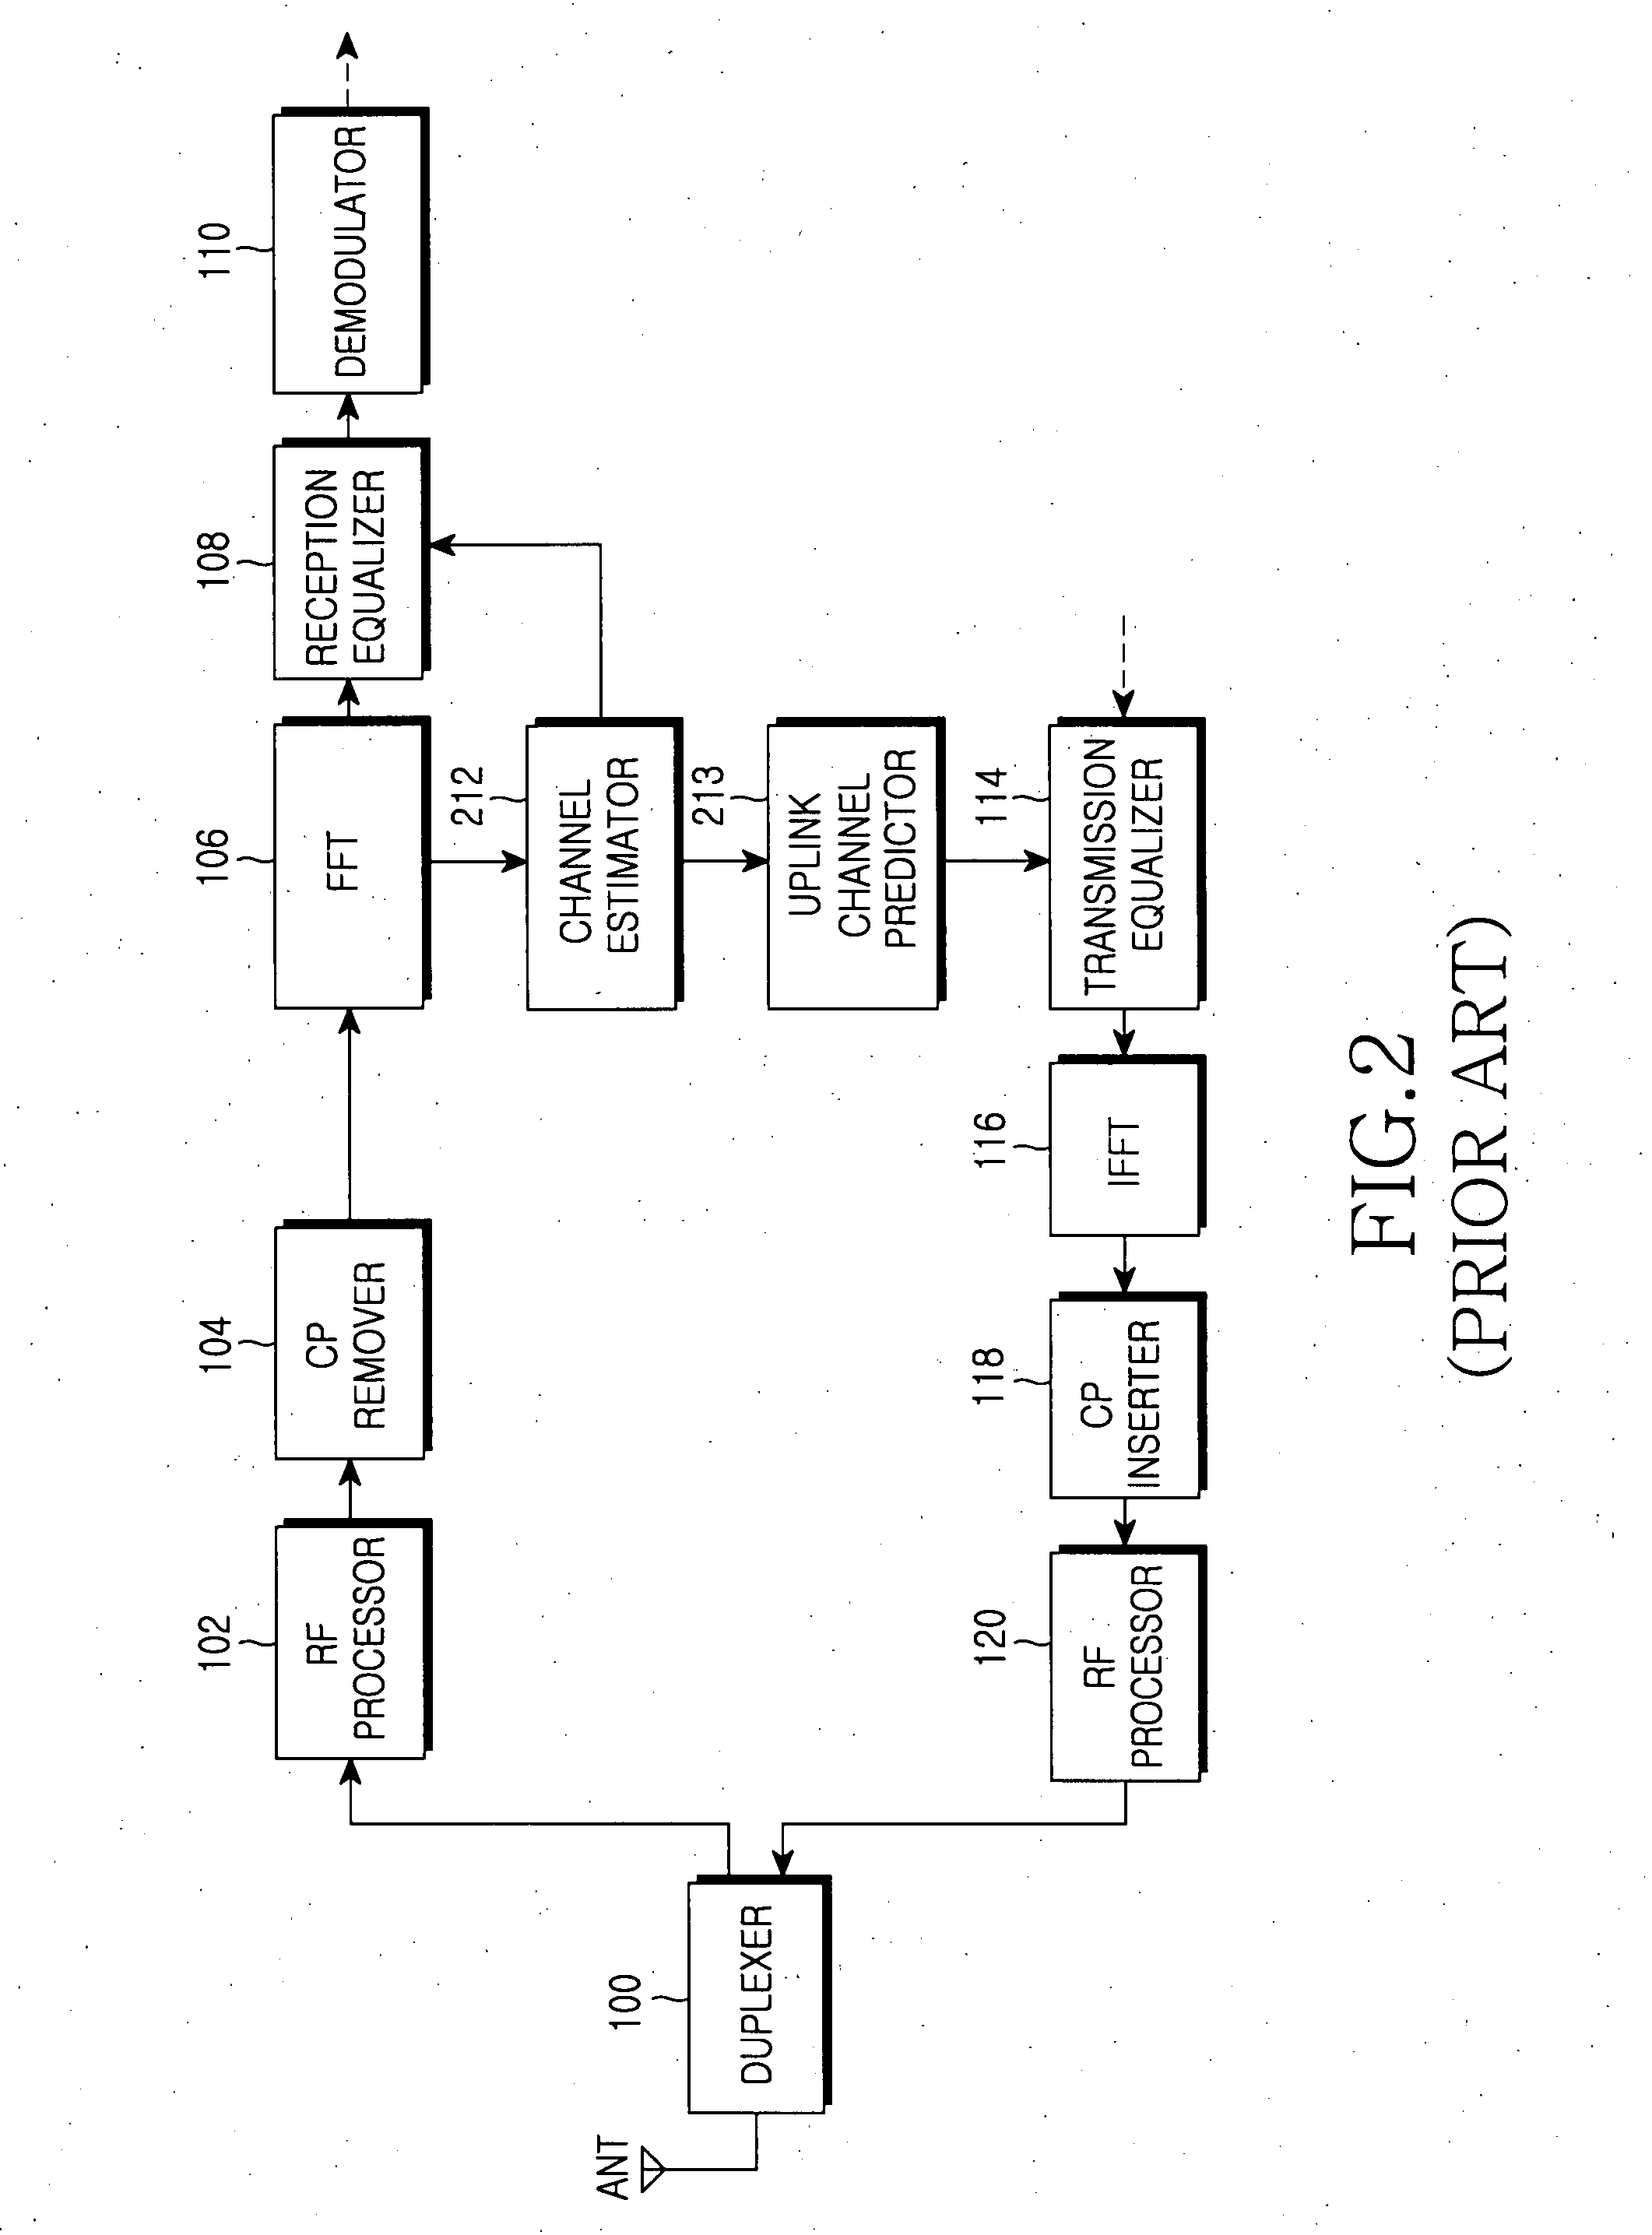 Adaptive channel prediction apparatus and method for performing uplink pre-equalization depending on downlink channel variation in OFDM/TDD mobile communication system